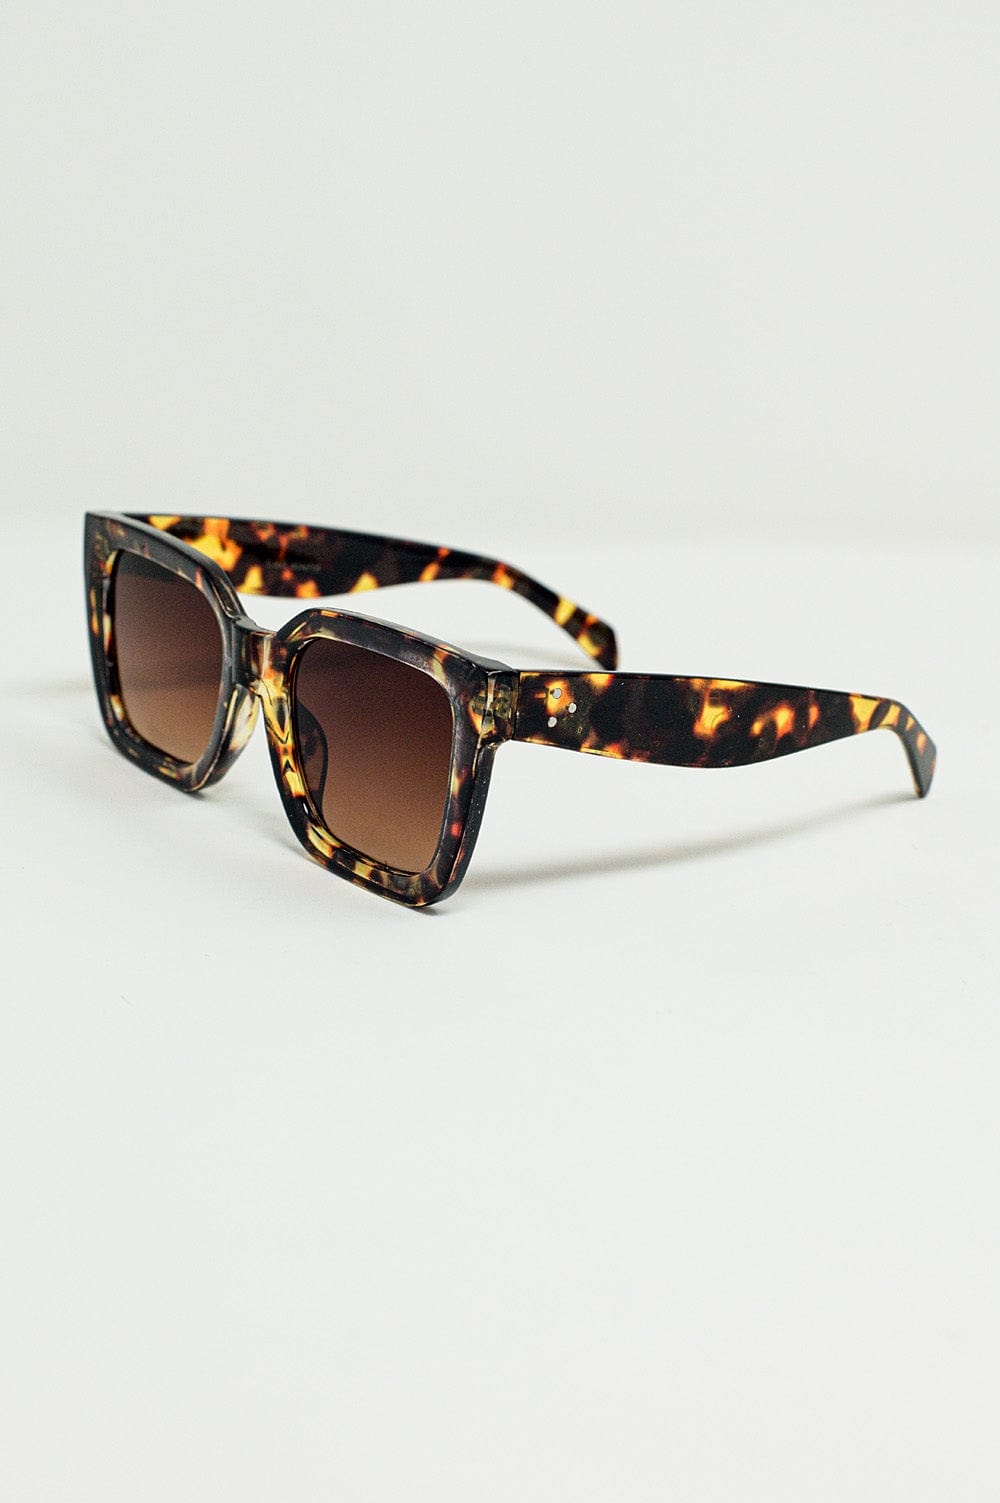 Q2 Women's Sunglasses One Size / Brown Elongated Squared Sunglasses With Dark Lenses In Tortoise Shell